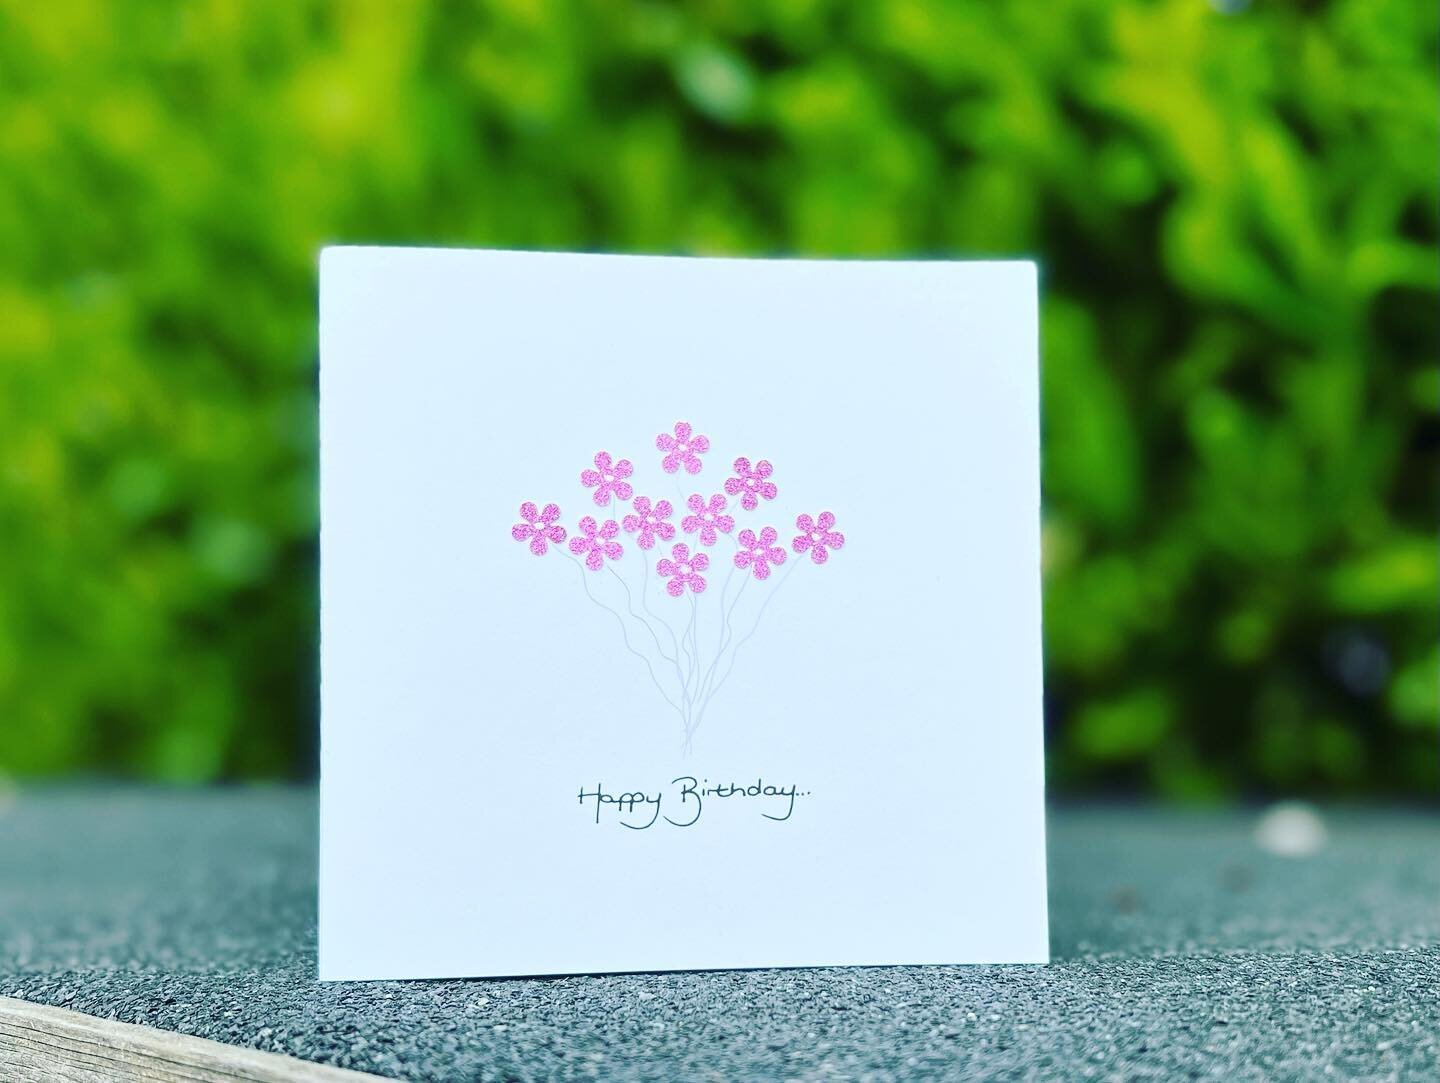 Morning All, a simple &lsquo;Happy Birthday&rsquo; card now available. Flowers cut from a glitter card with a white painted stamen. Can be made in a colour of your choice. Please DM me for any personalisation requests 🌸